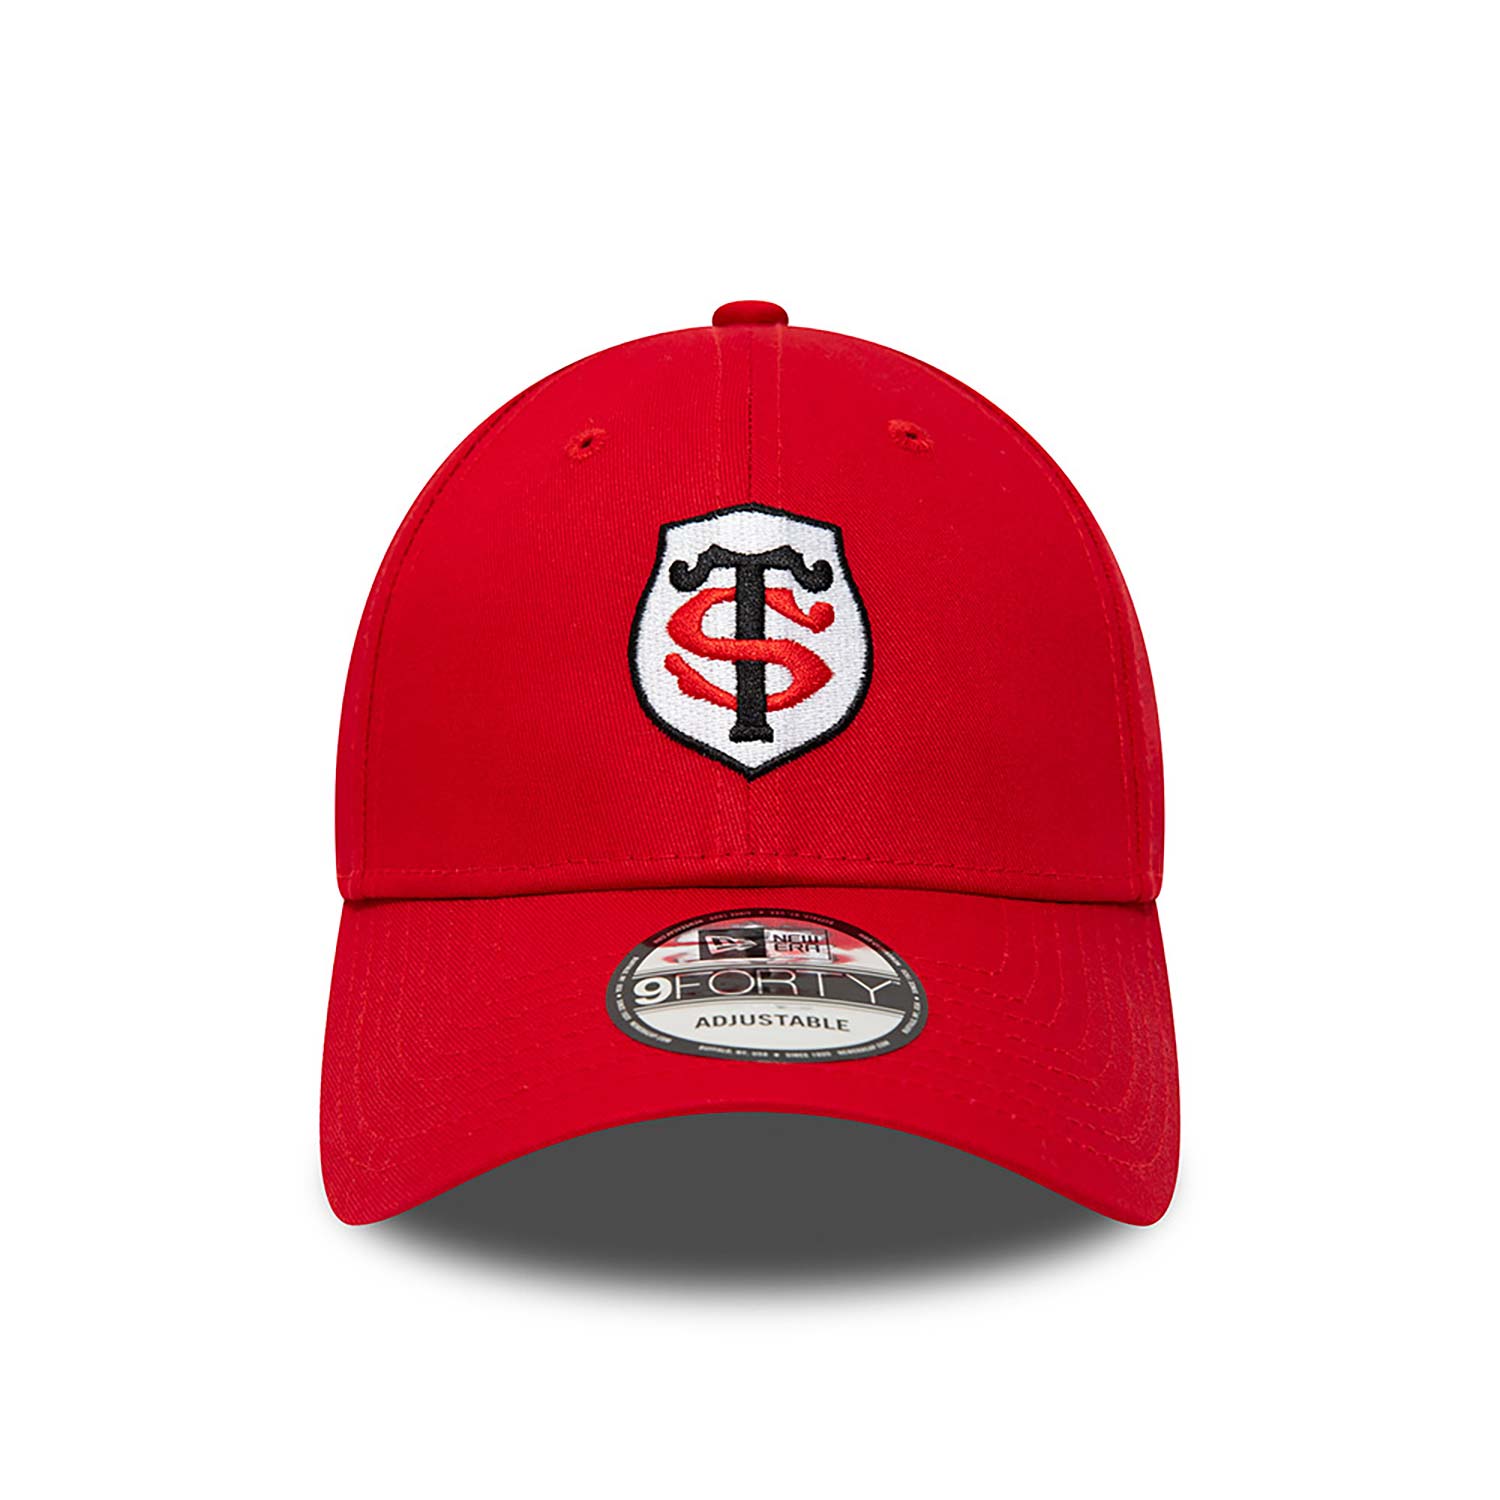 Stade Toulousain Team Logo Red 9FORTY Adjustable Cap